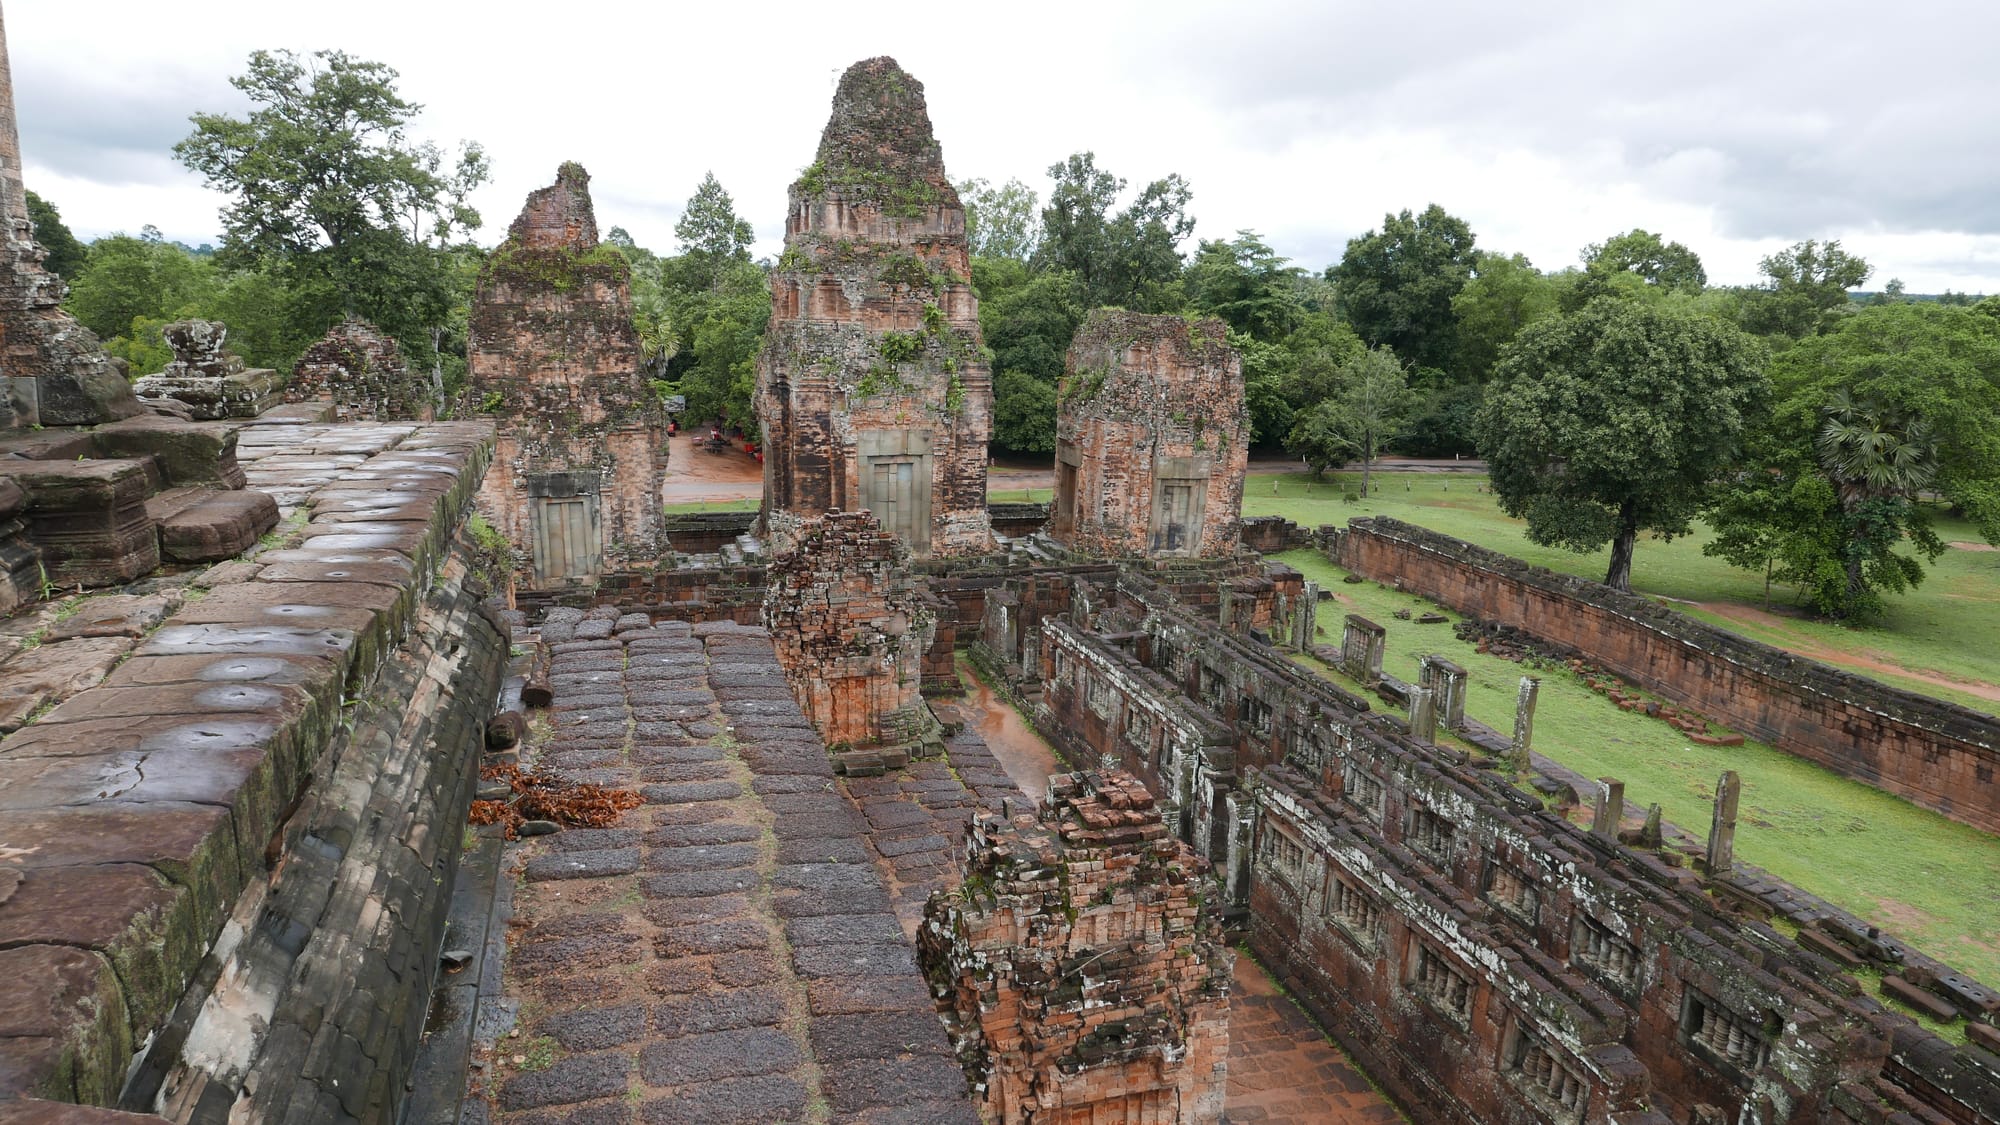 Photo by Author — Pre Rup (ប្រែរូប), Angkor Archaeological Park, Angkor, Cambodia